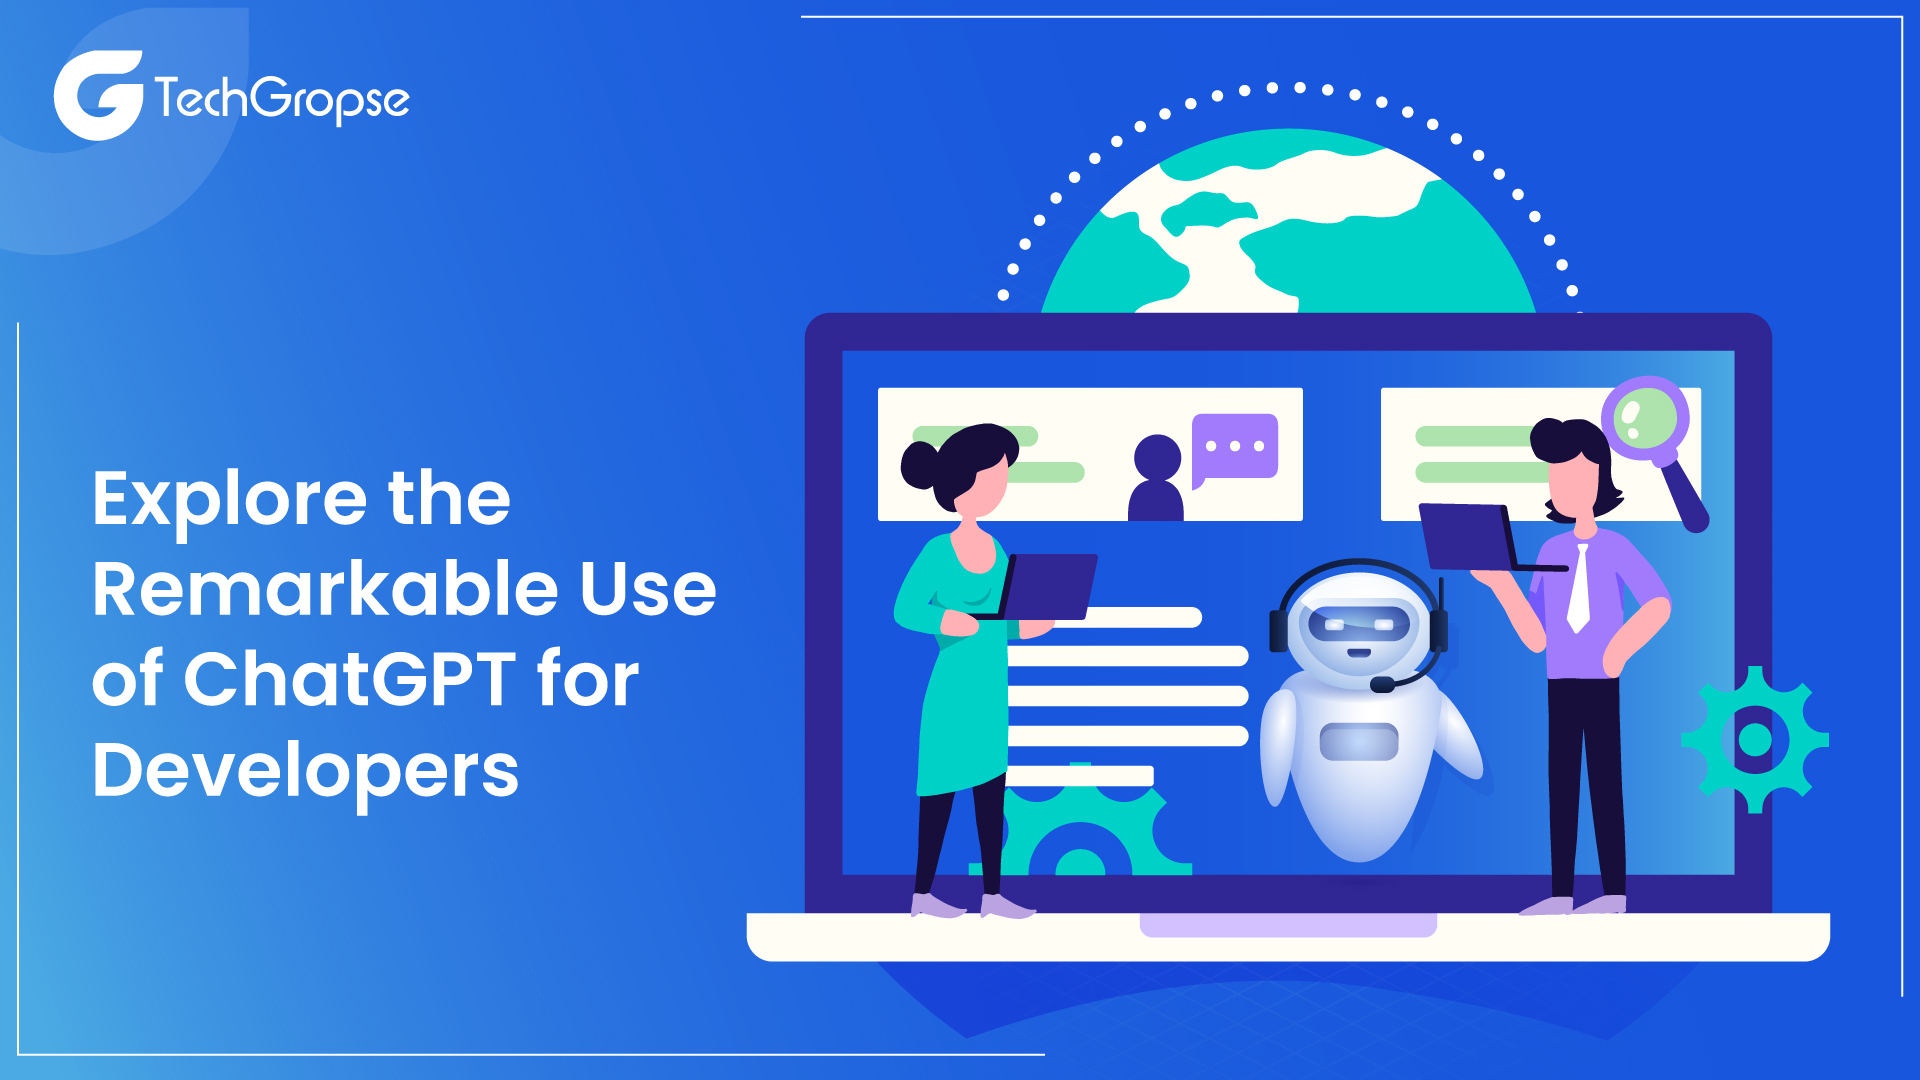 Explore the Remarkable Use of ChatGPT for Developers